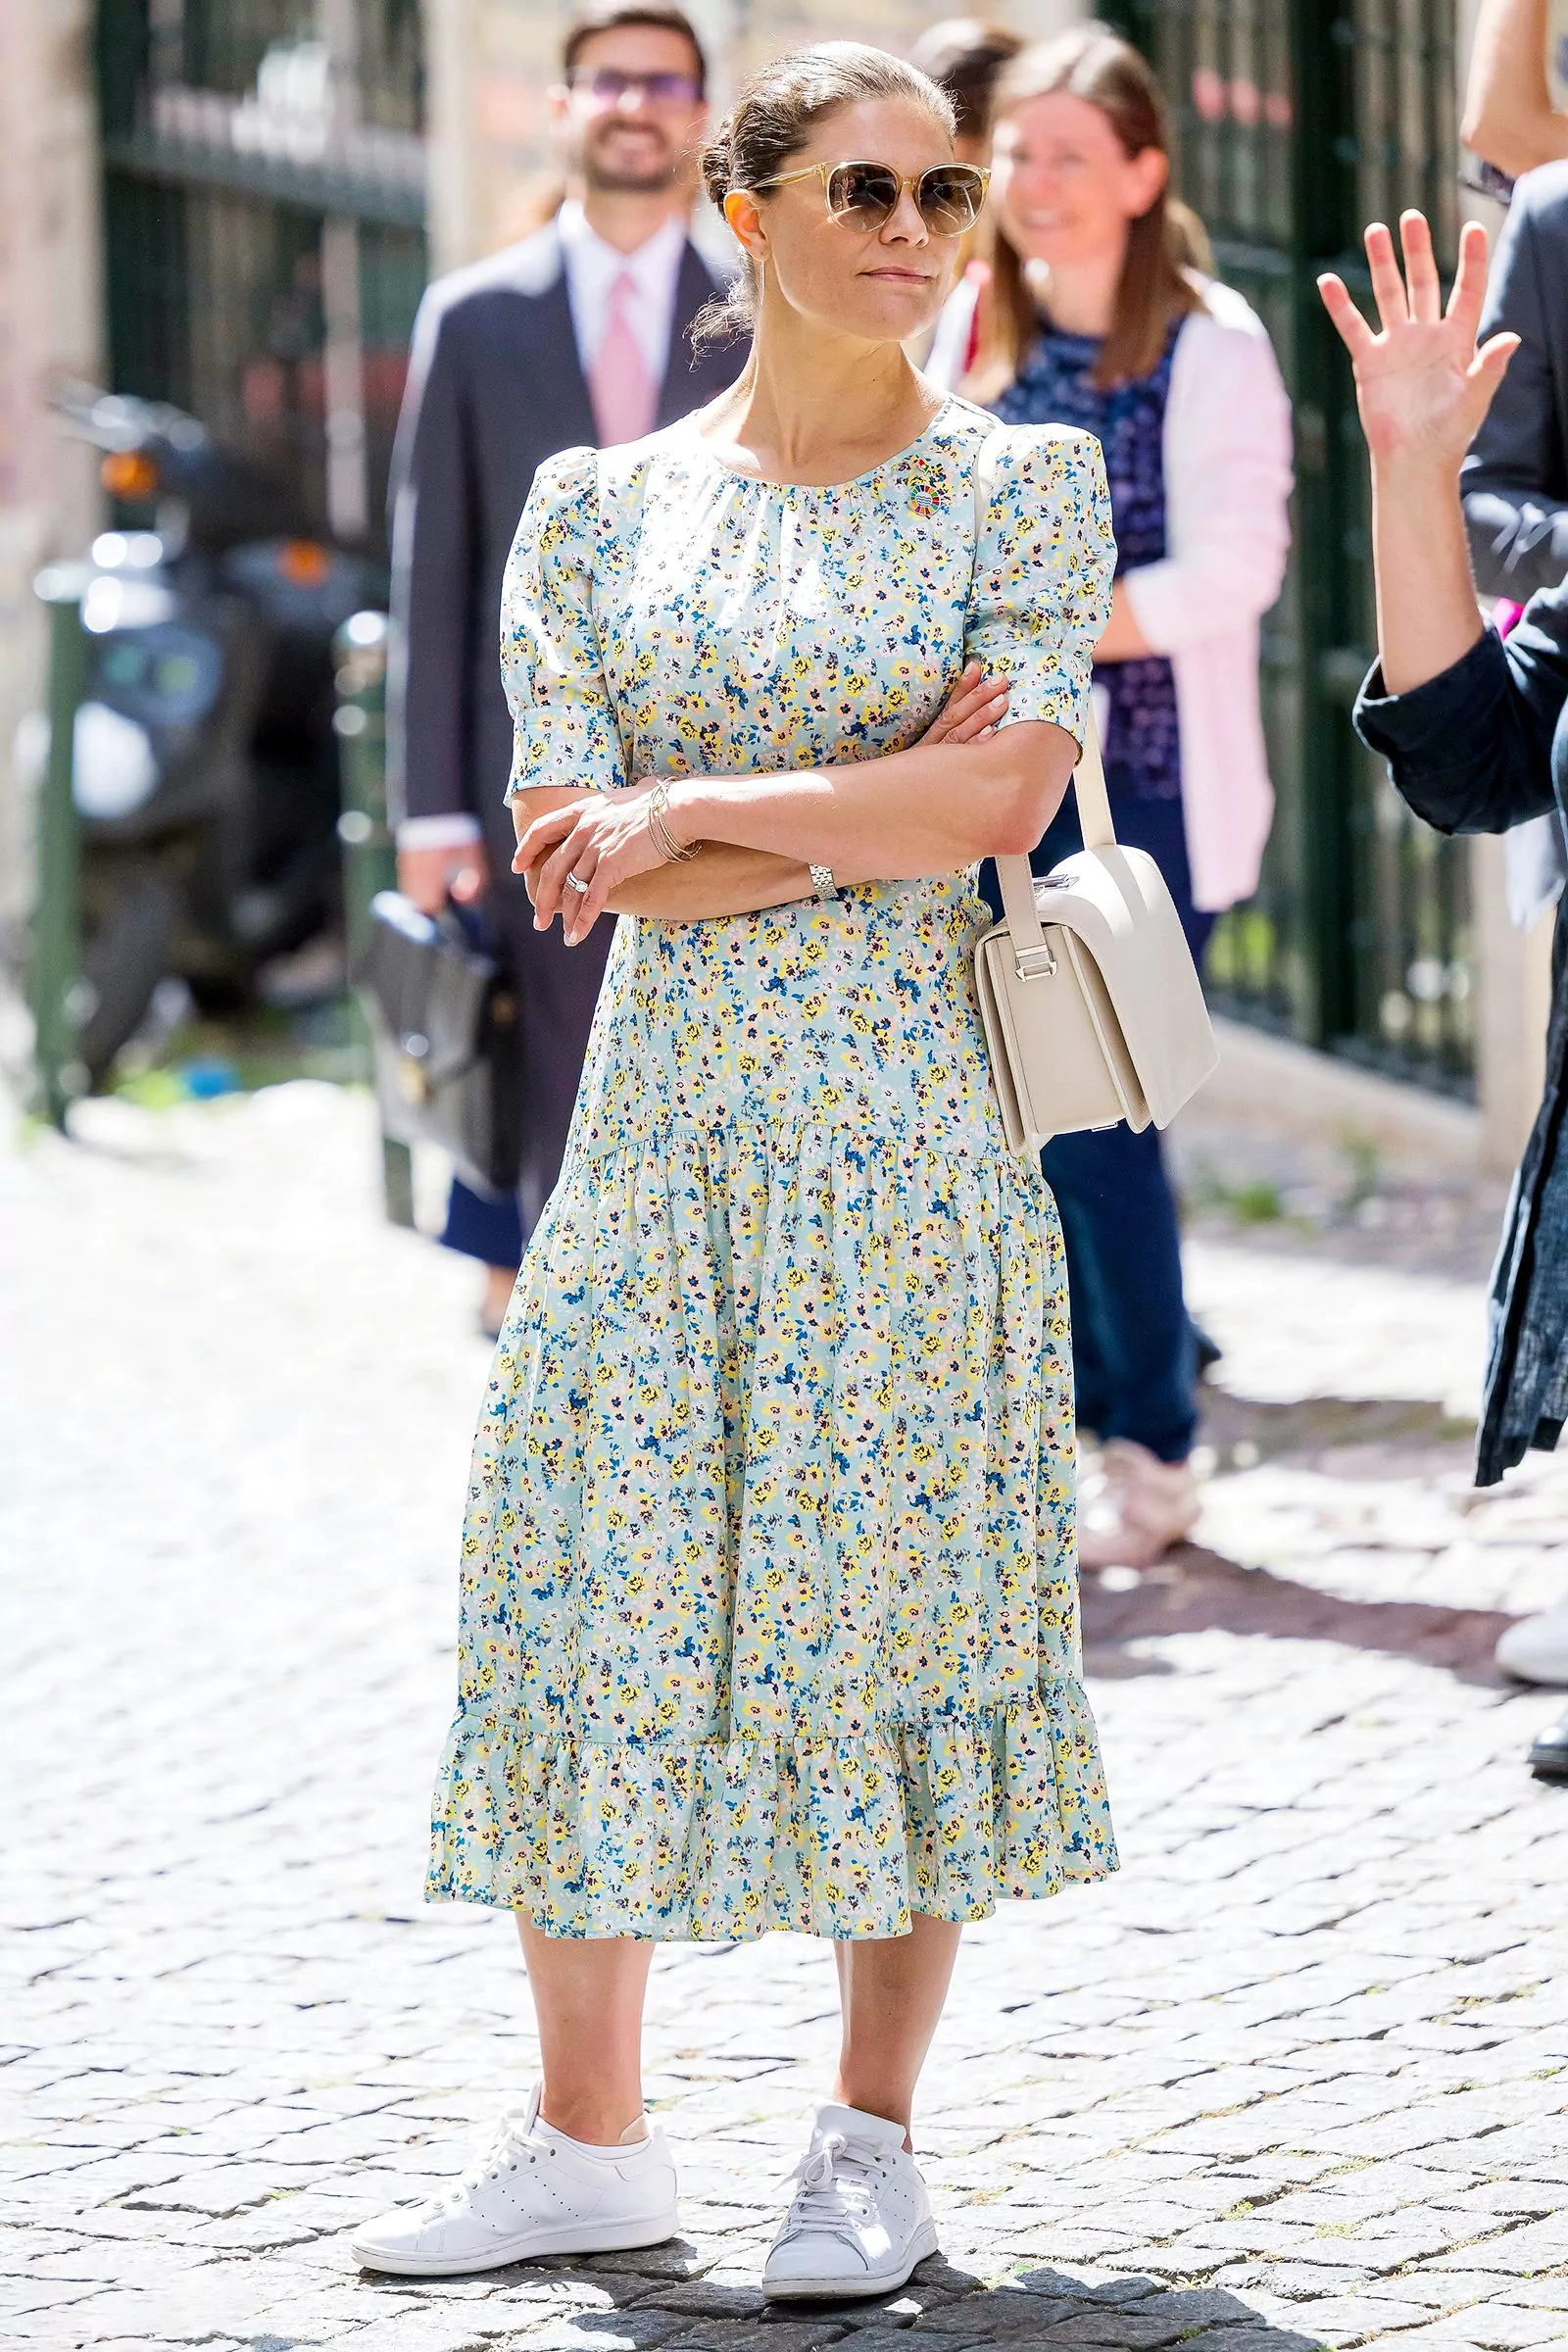 Princess Victoria on a tour of the Old City as part of the United Nations conference in Lisbon, June 29, 2022.